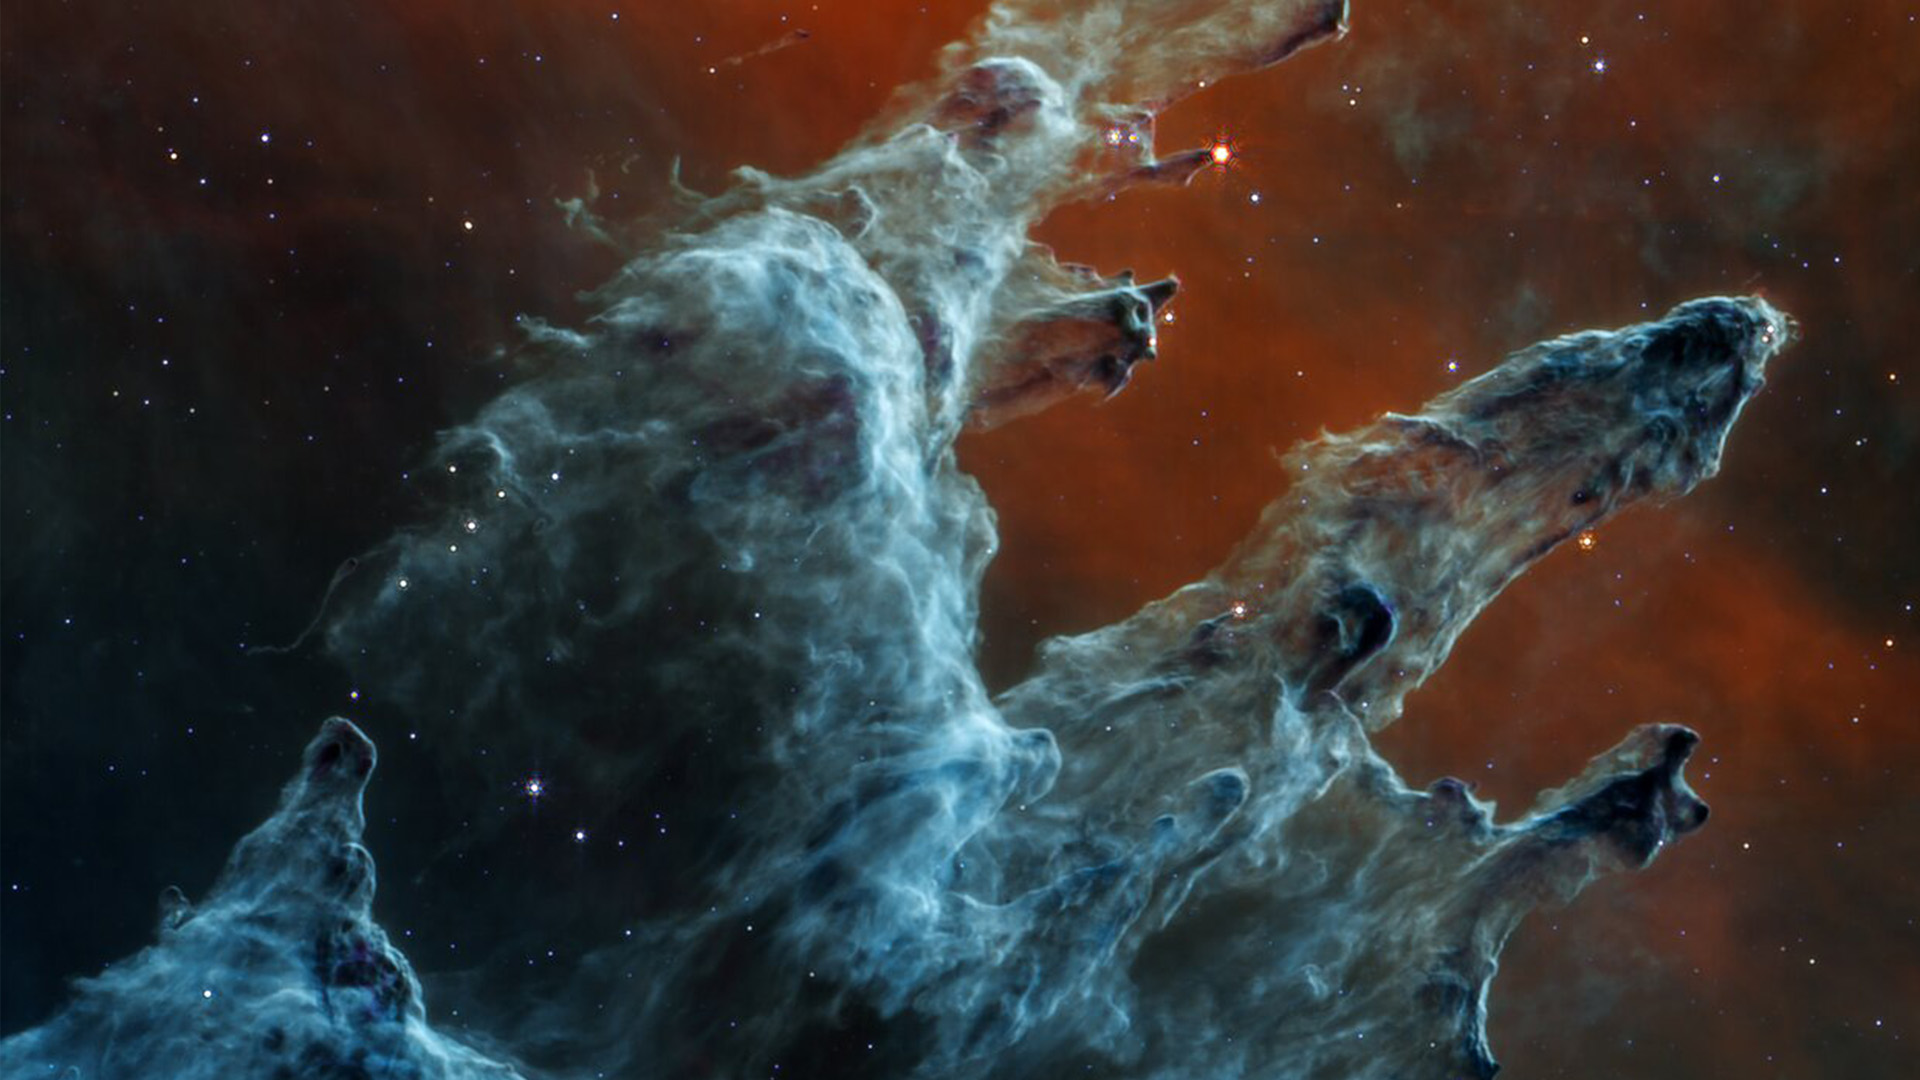 Nasa releases never before seen image of Pillars of Creation, captured in haunting detail by James Webb Space Telescope